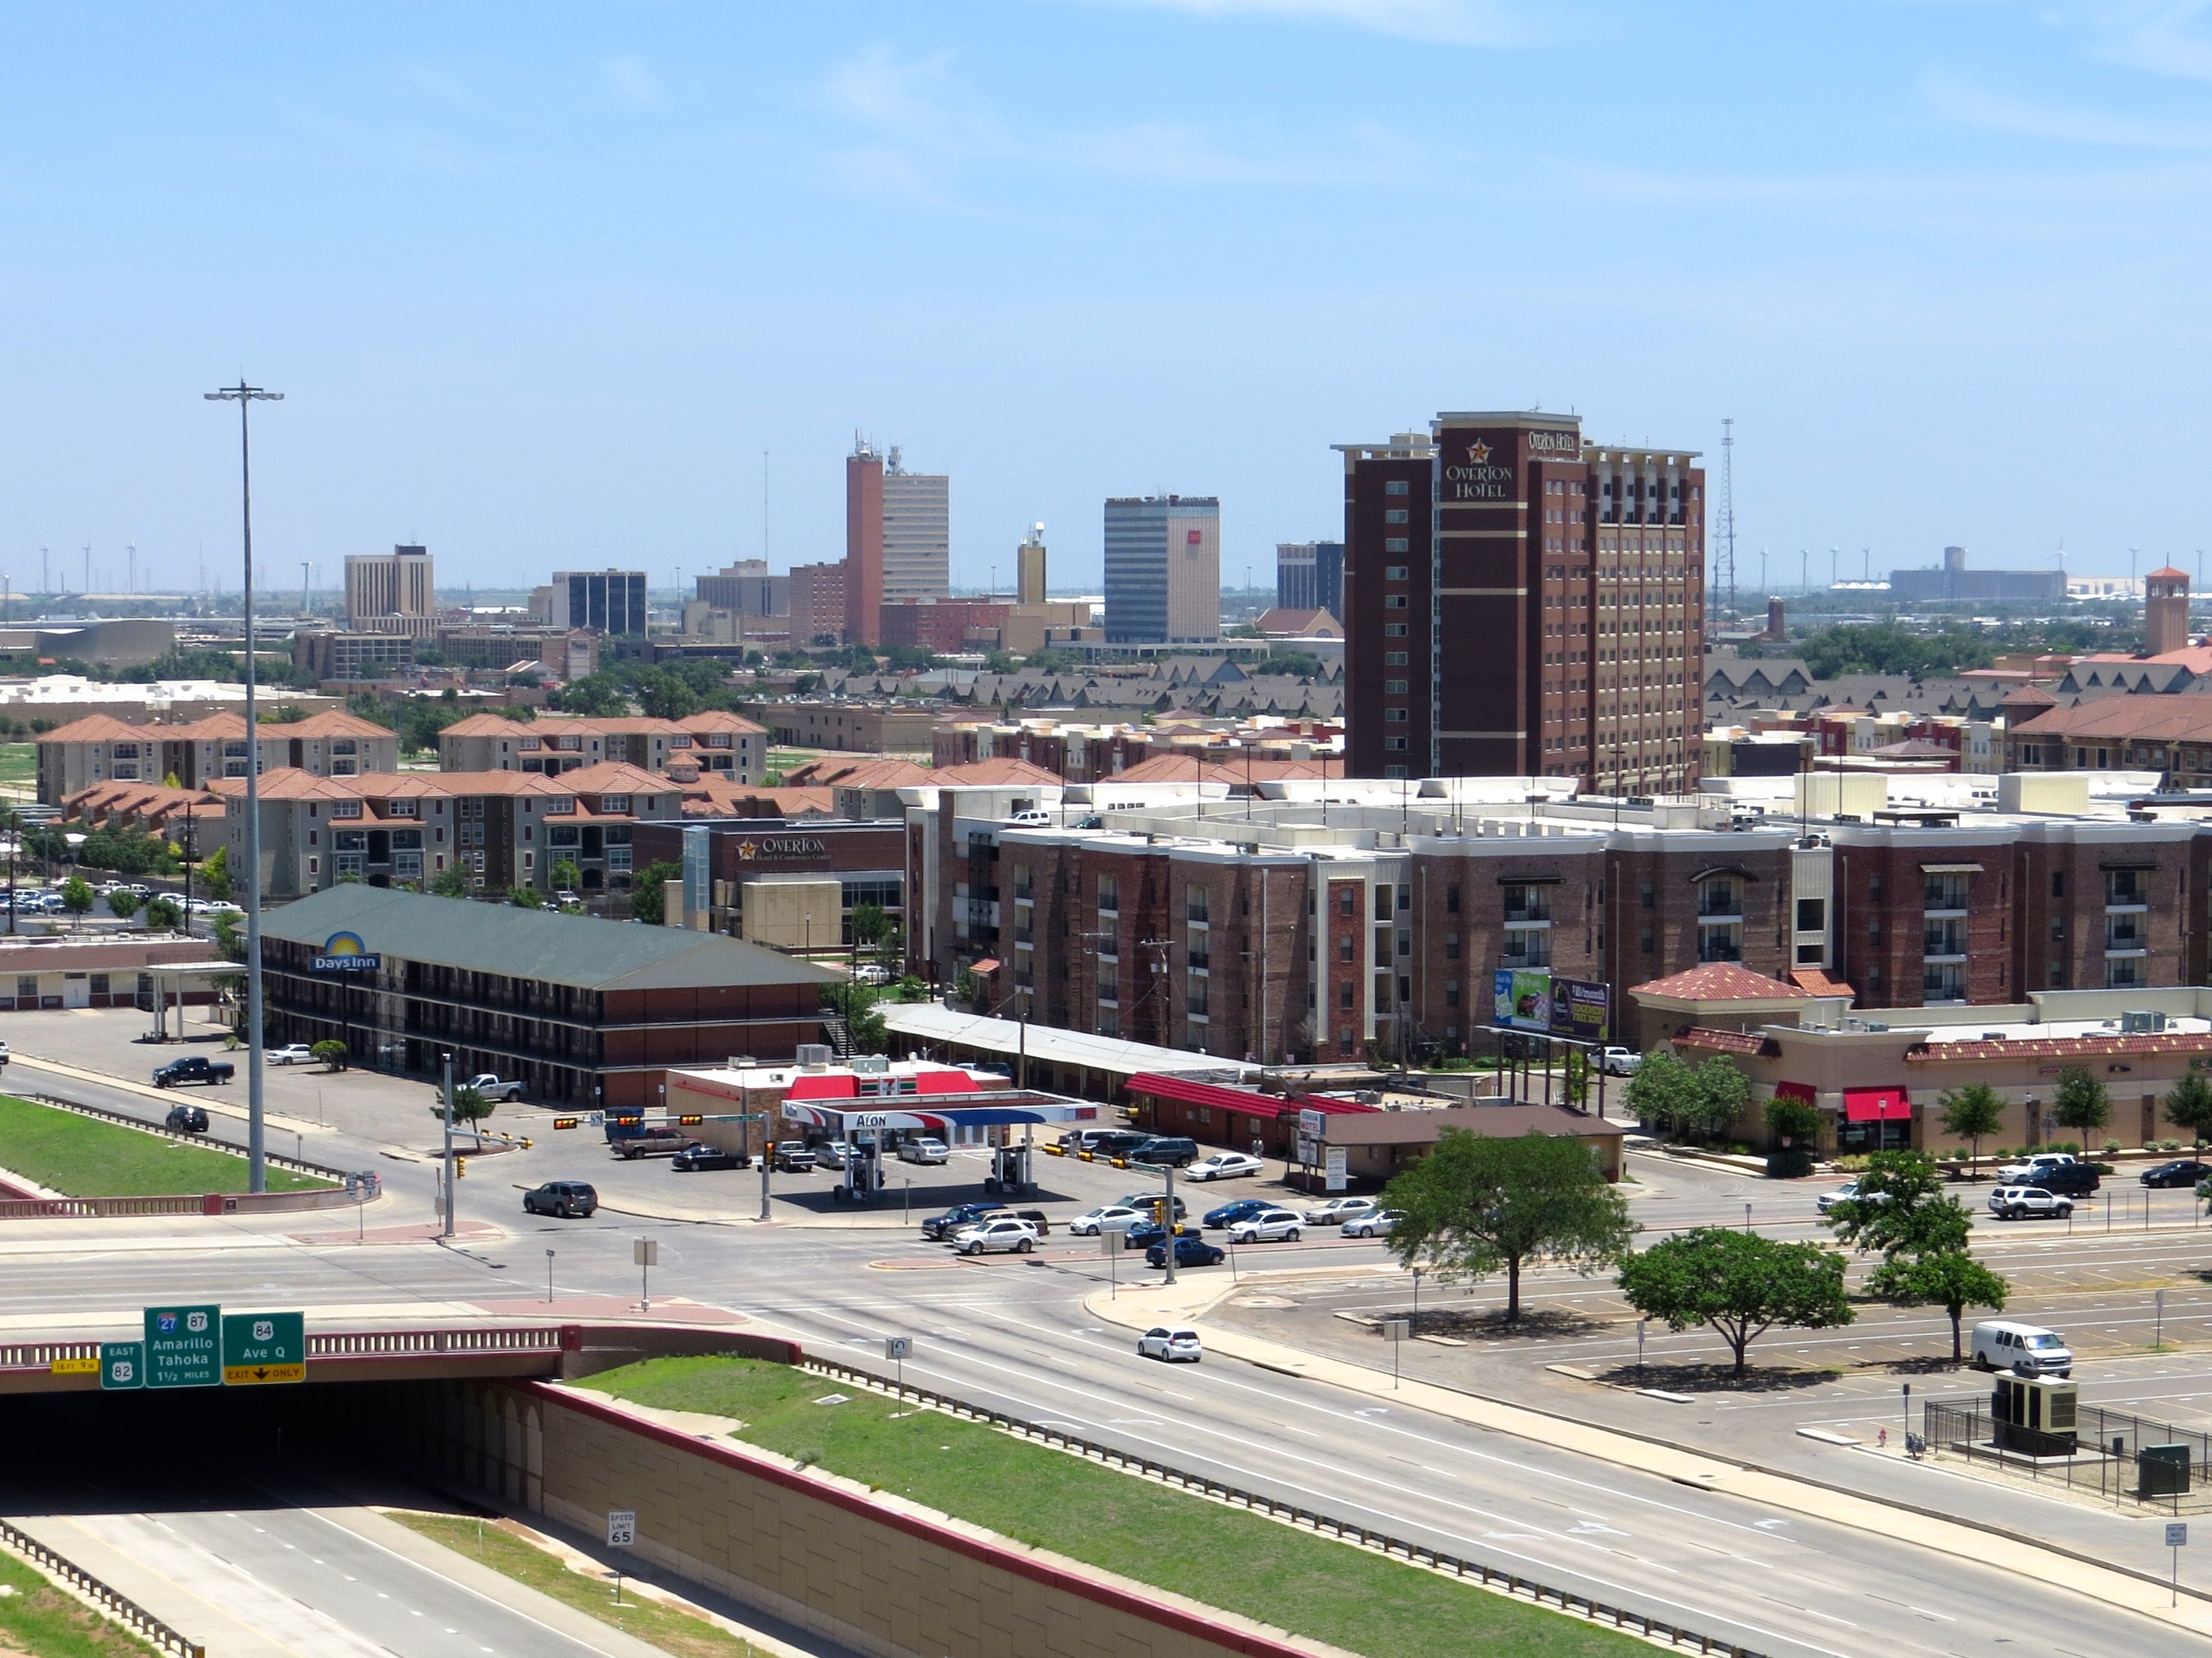 Lubbock ( LUB-ək)
is the 10th-most populous city in the U.S. state of Texas and the seat of government of Lubbock County. With a population of 263,930 in 2022, the city is also the 85th-most populous in the United States. The city is in the northwestern part of the state (the region is the Great Plains), an area known historically and geographically as the Llano Estacado, and ecologically is part of the southern end of the High Plains, lying at the economic center of the Lubbock metropolitan area, which had an estimated population of 328,283 in 2022.Lubbock's nickname, "Hub City," derives from it being the economic, educational, and health-care hub of the multicounty region, north of the Permian Basin and south of the Texas Panhandle, commonly called the South Plains. The area is the largest contiguous cotton-growing region in the world and is heavily dependent on water from the Ogallala Aquifer for irrigation.
Lubbock is home to Texas Tech University, the sixth-largest college by enrollment in the state.